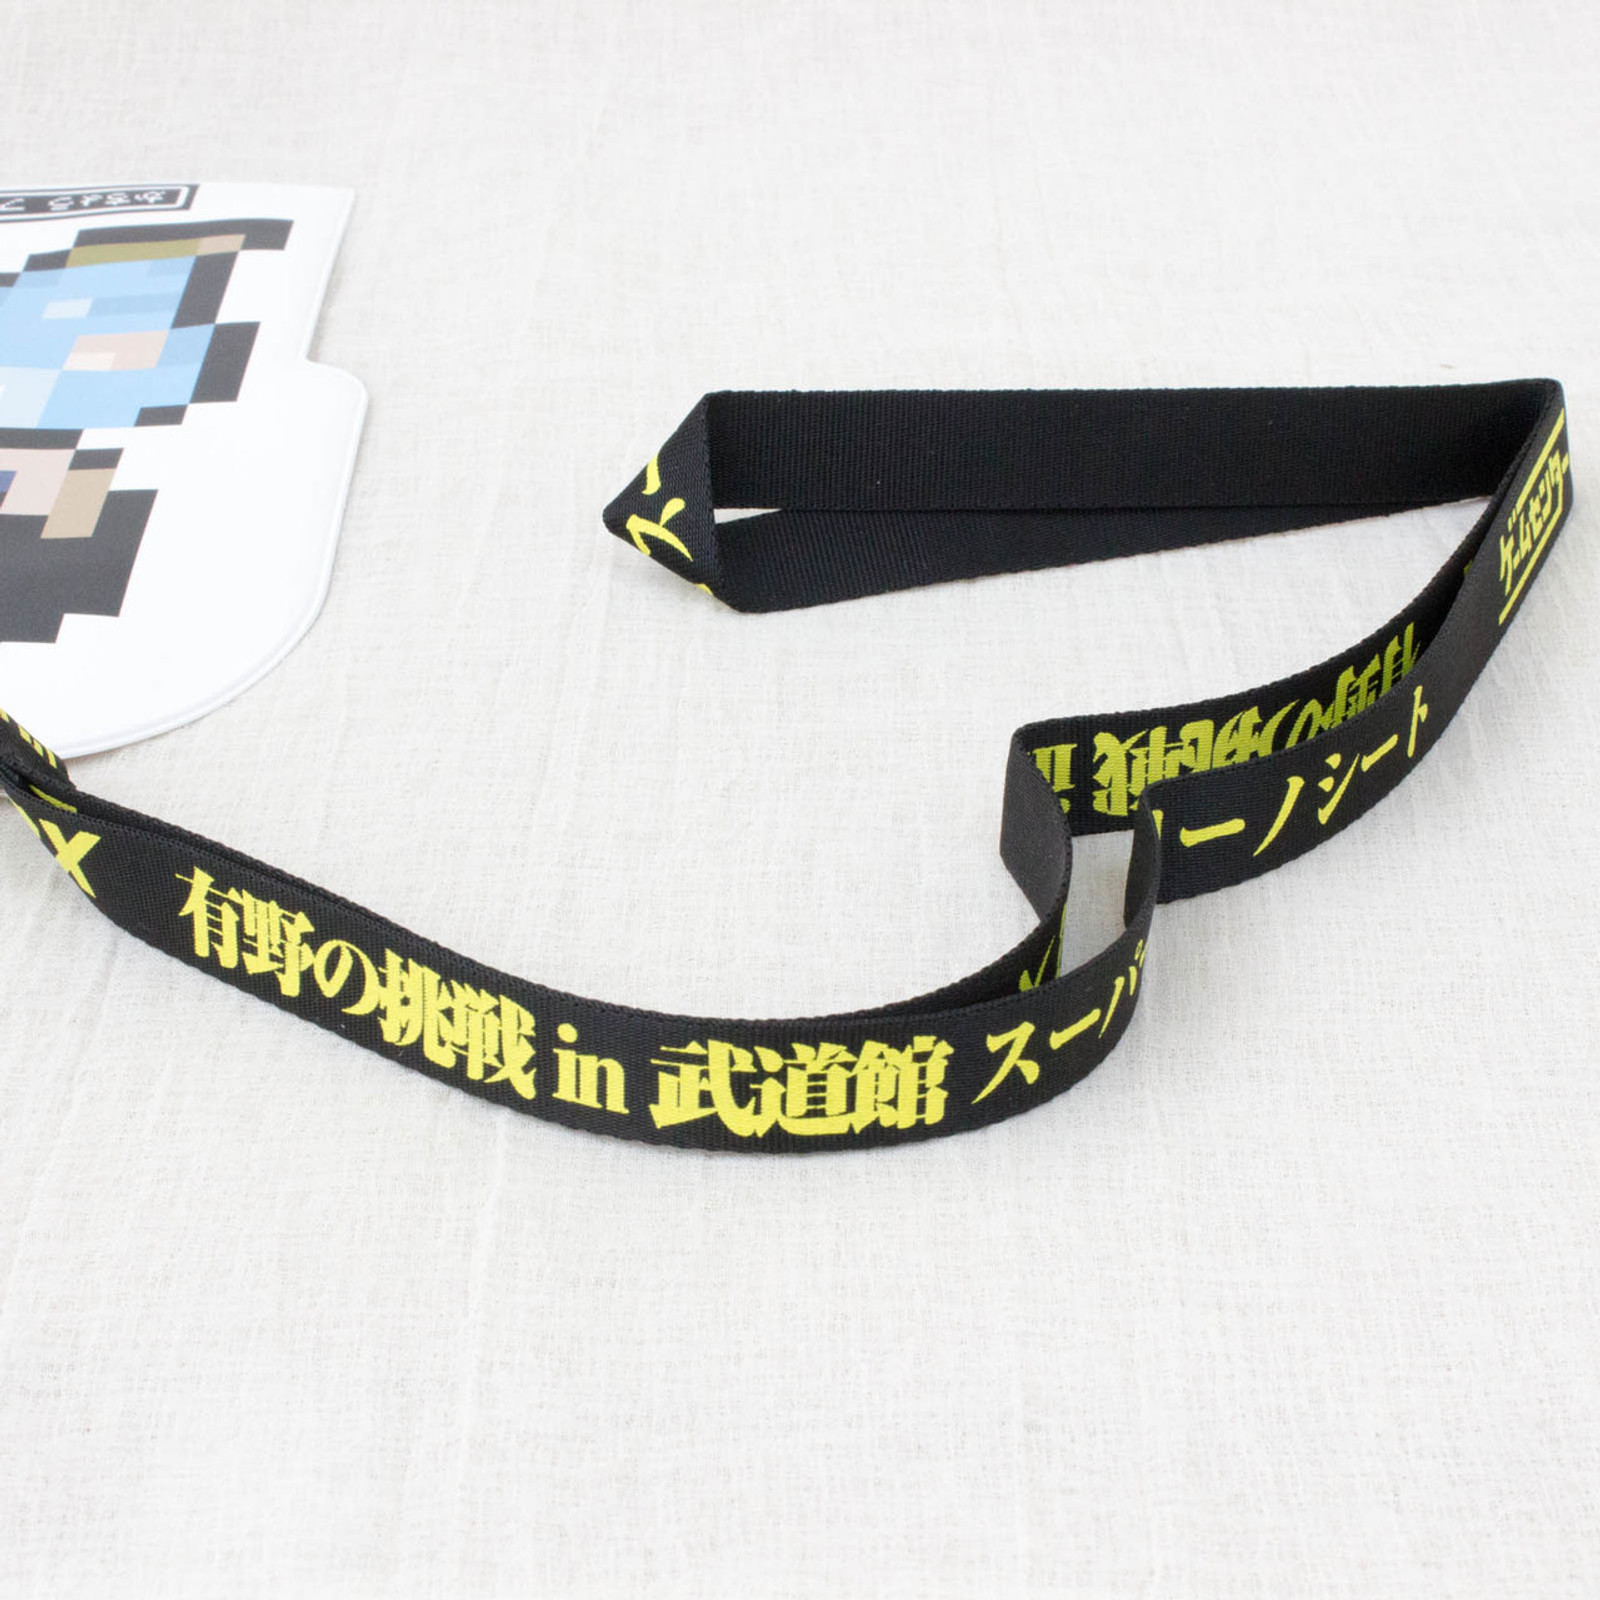 Game Center CX in Budokan 2013 Ticket Holder for Super Arino Sheet Limited Item